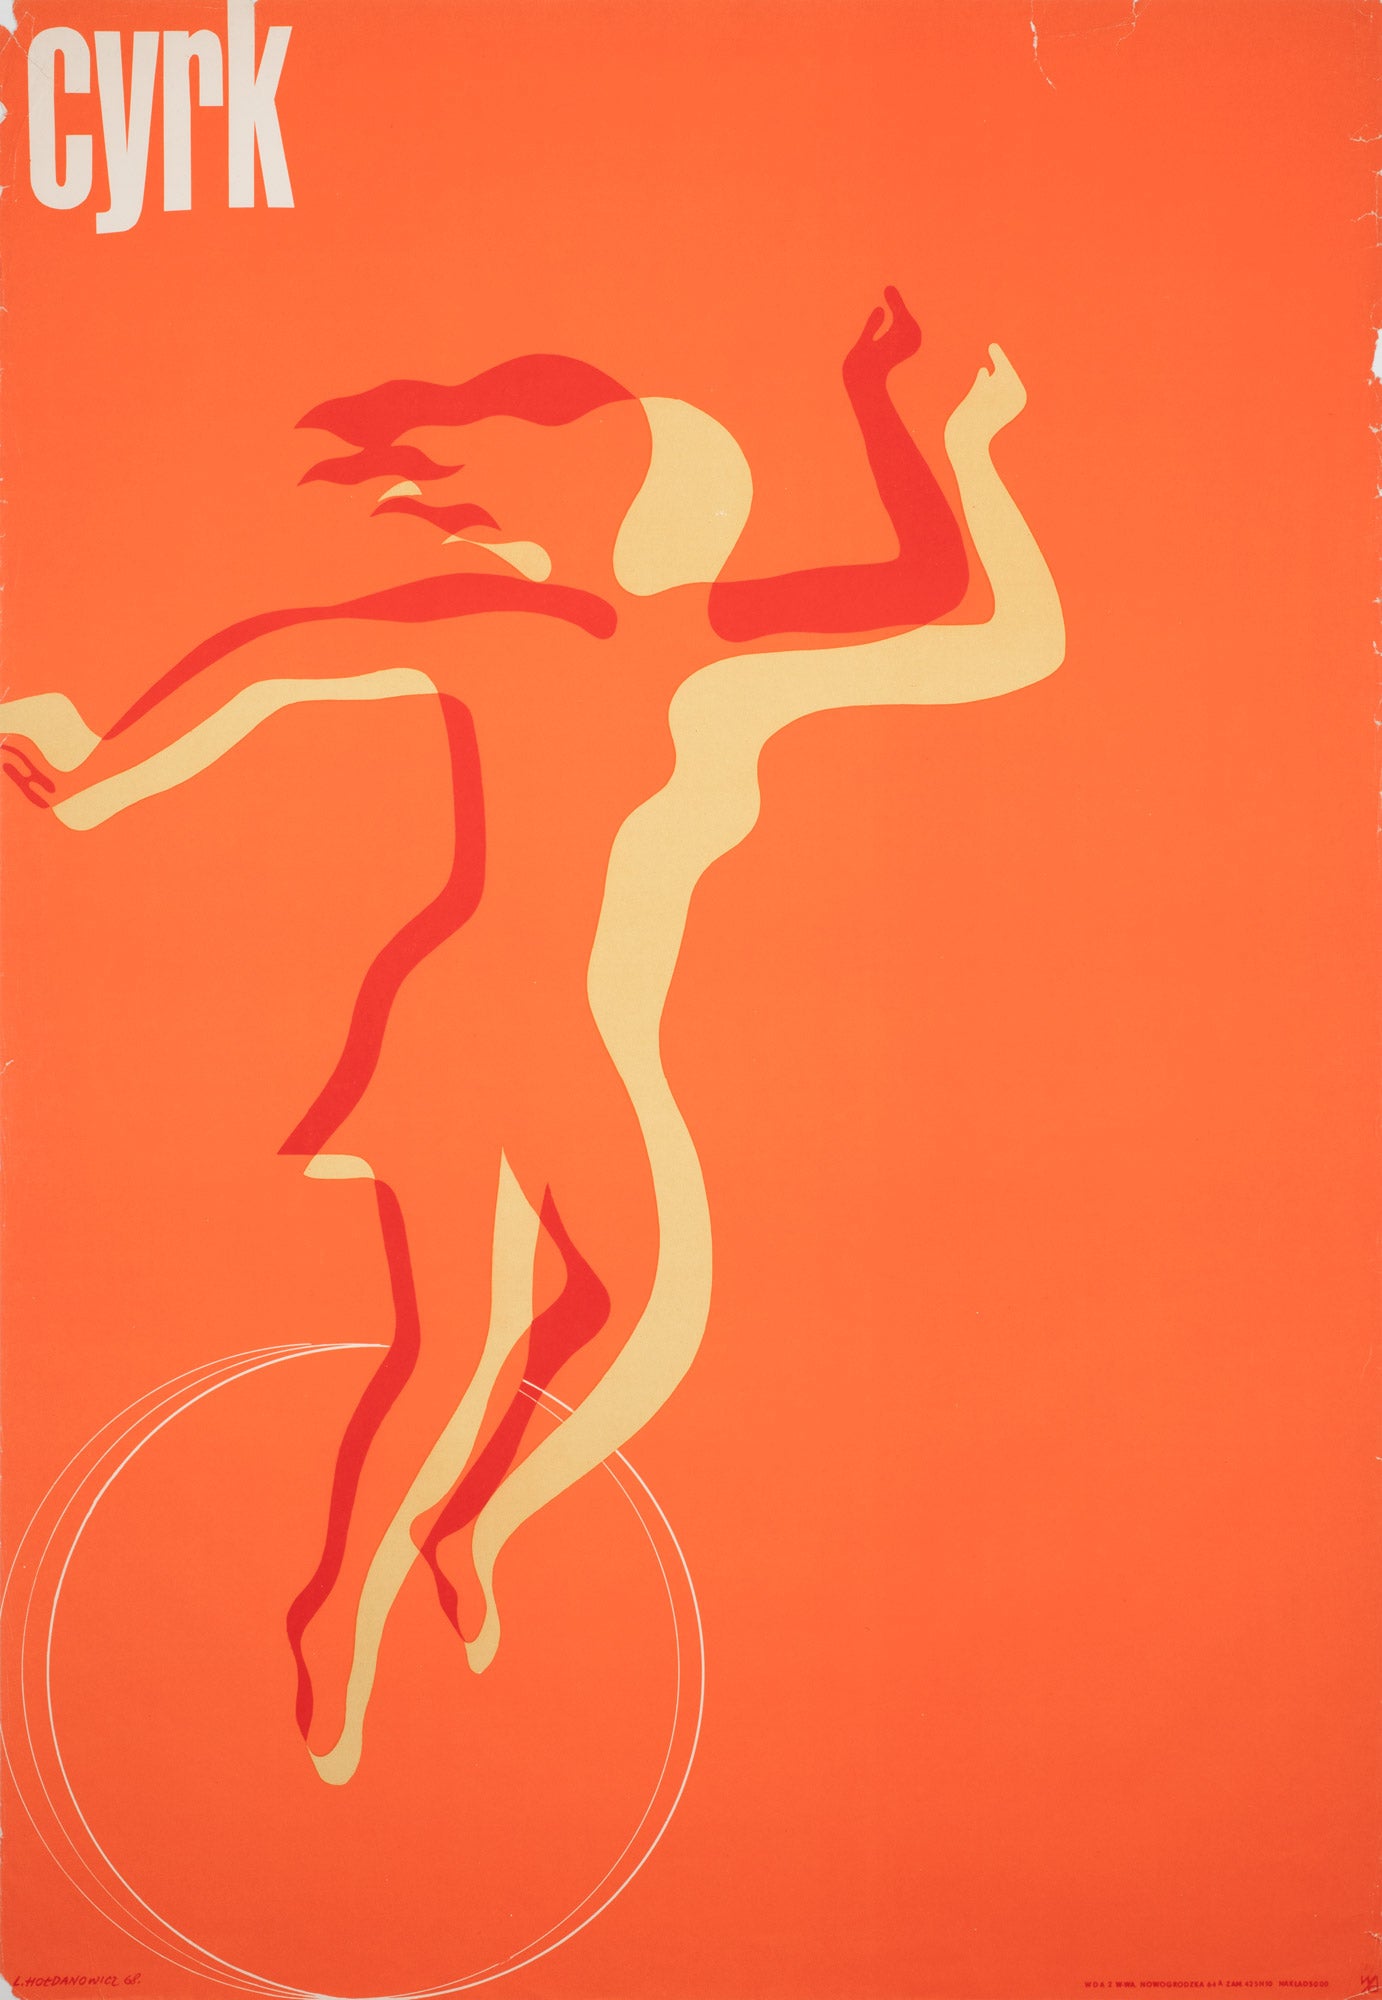 Cyrk Woman in Silhouette on Ball 1968 Polish Circus Poster, Holdanowicz